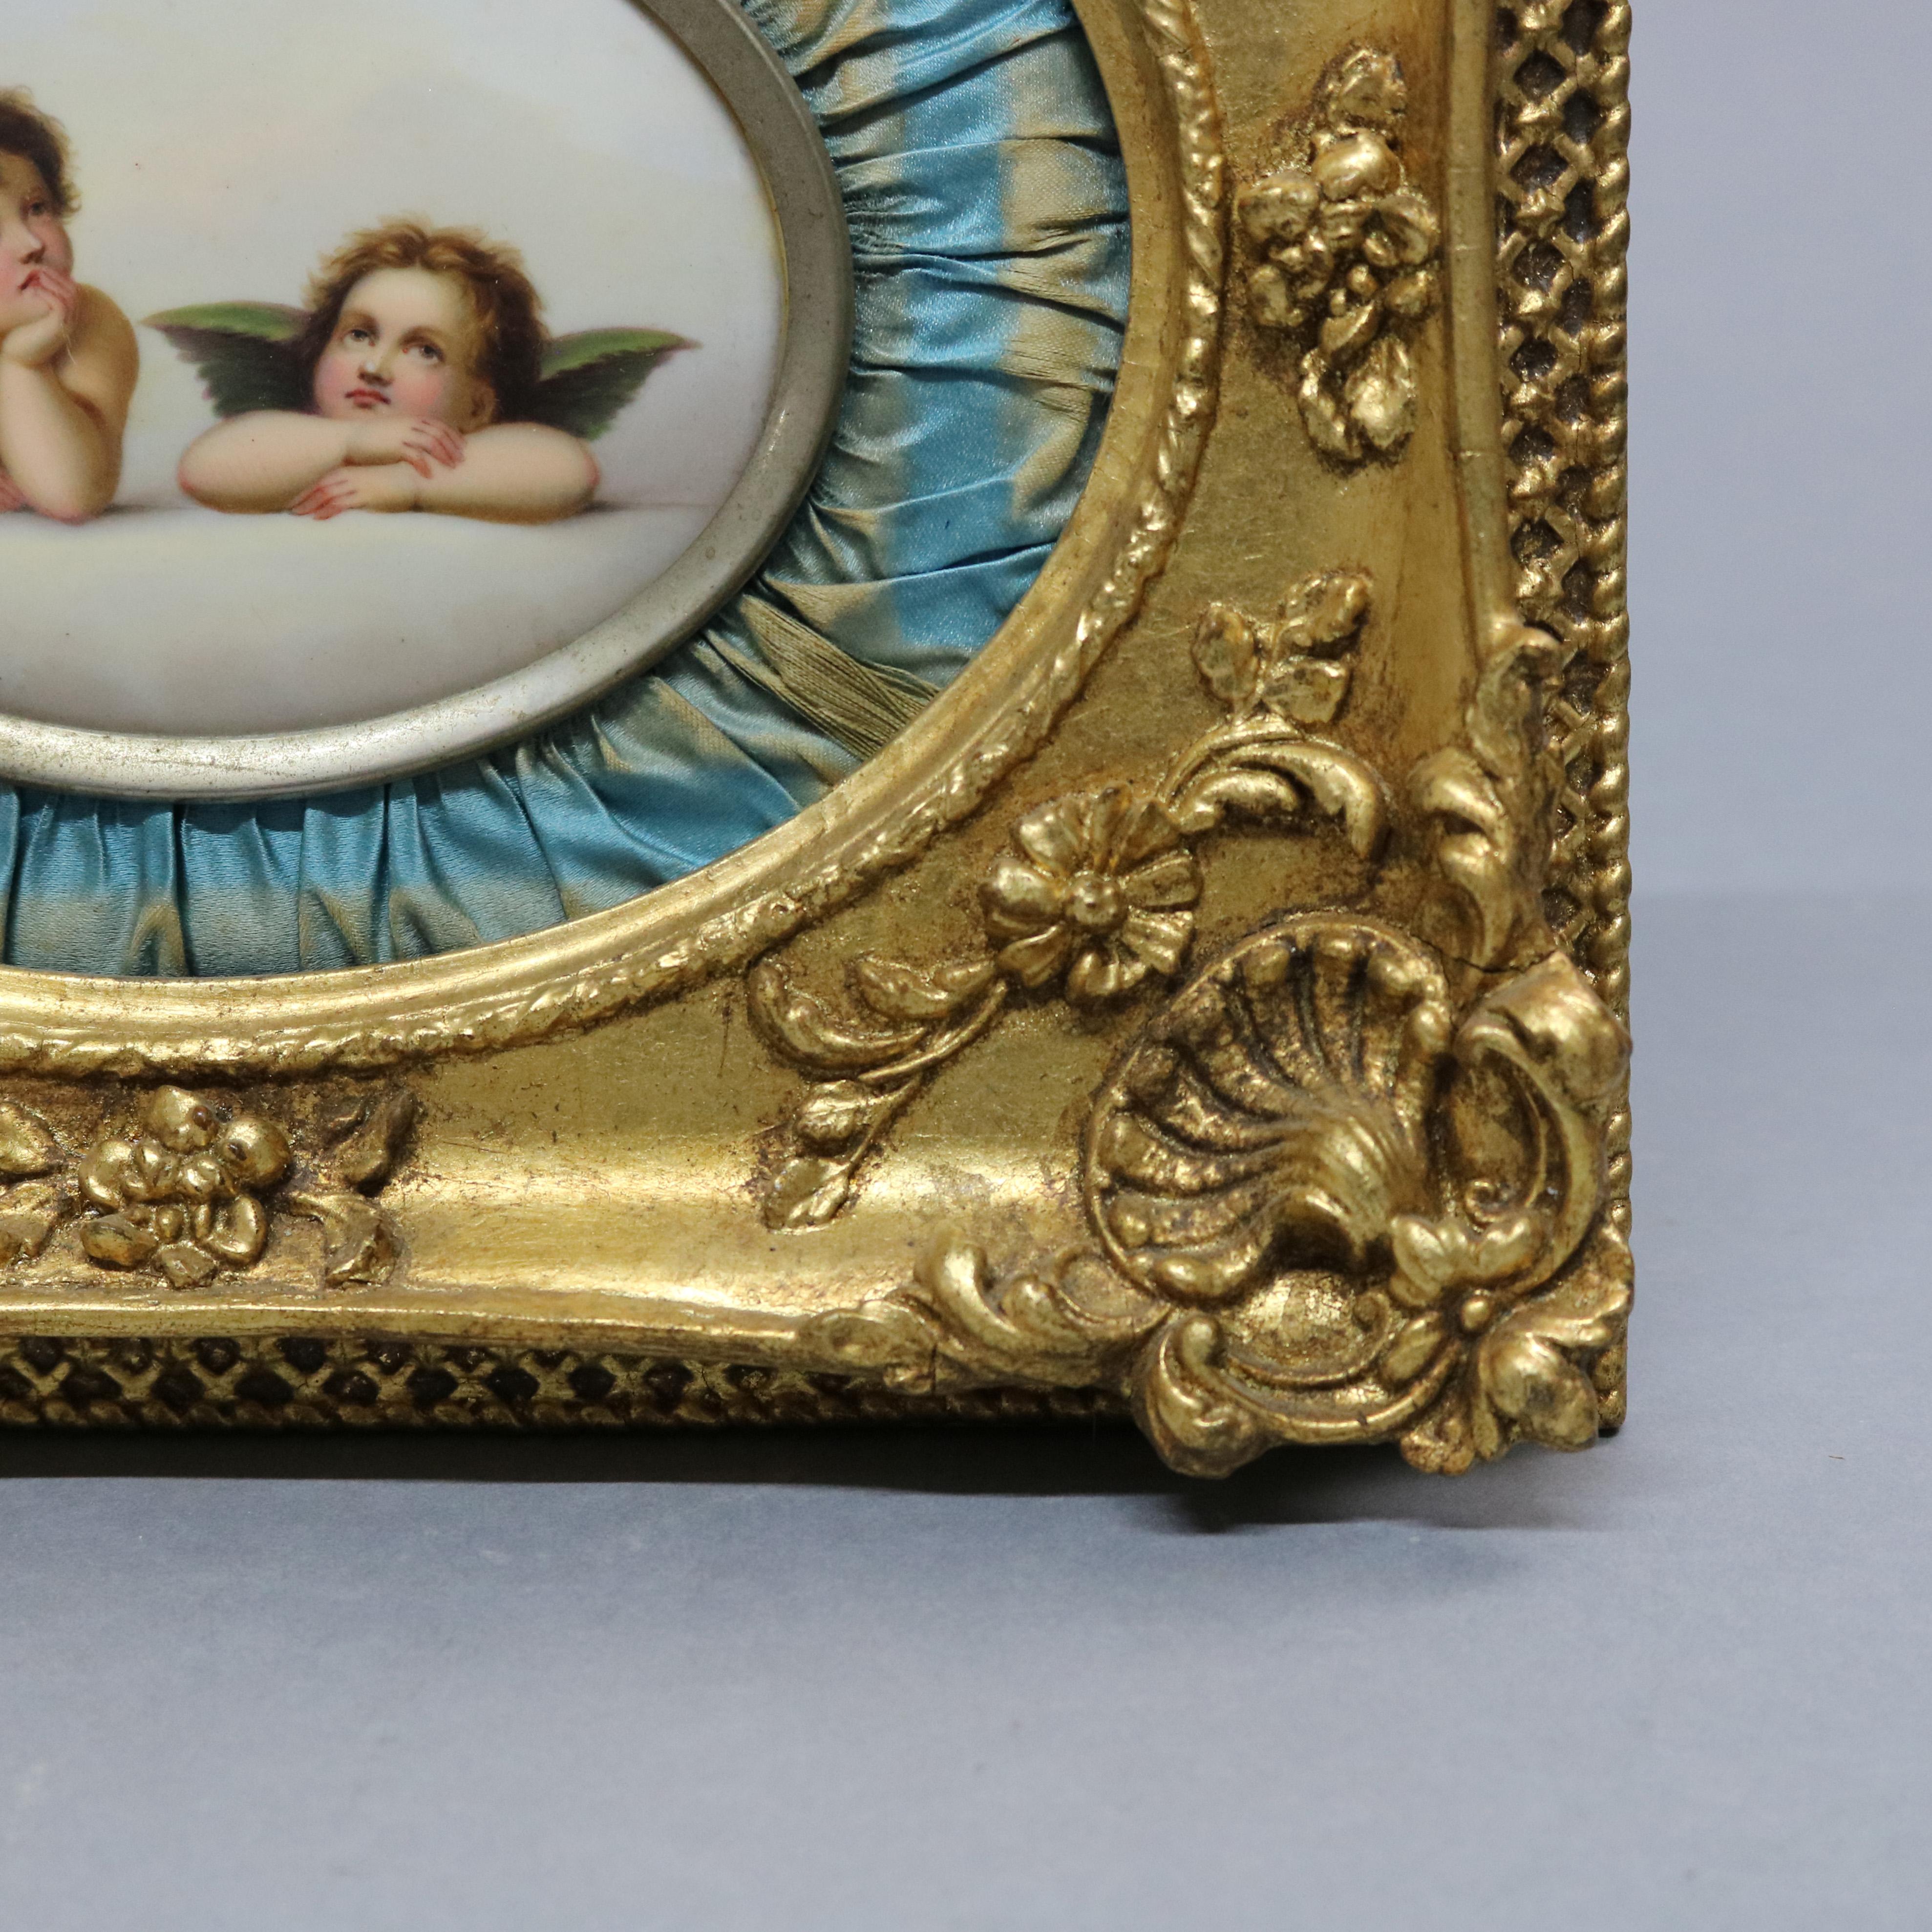 19th Century Antique Giltwood Framed Painting on Porcelain KPM School of Winged Cherubs 19thC